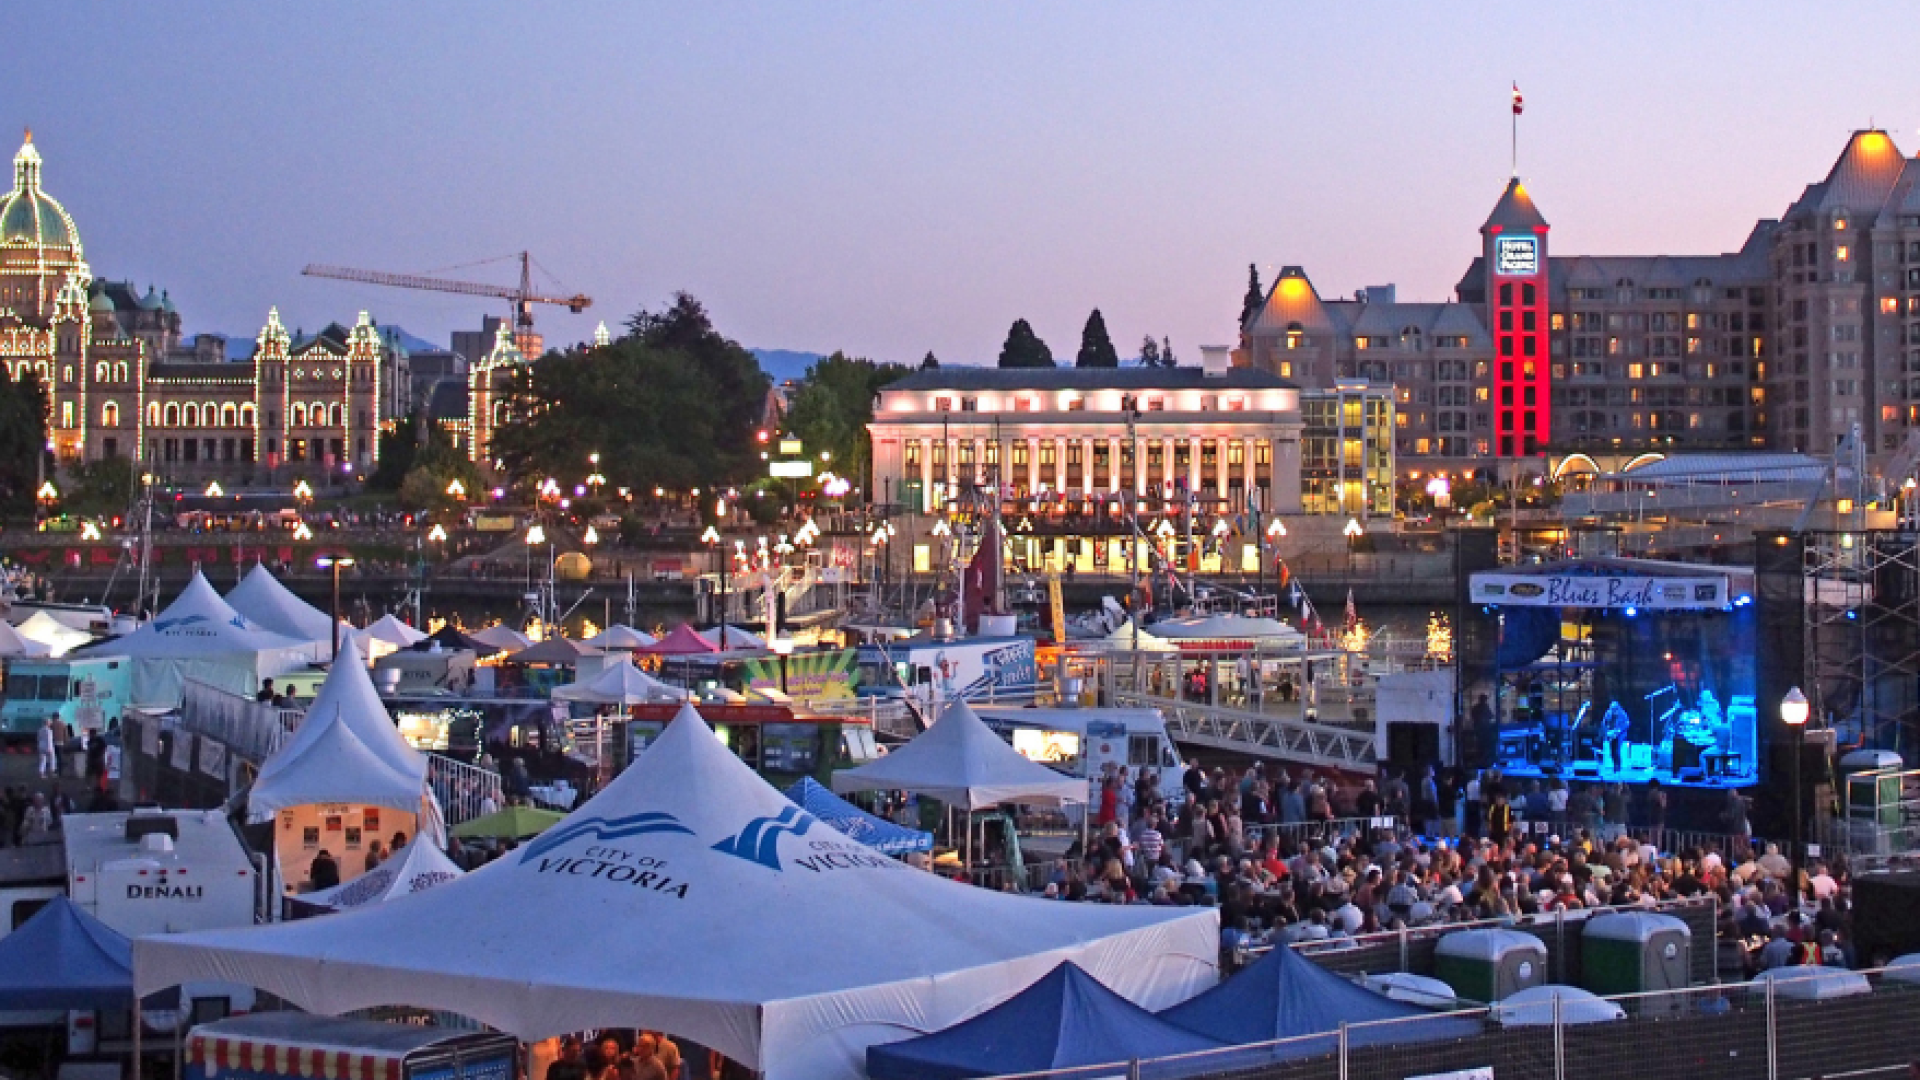 Blues Festival at sunset in Inner Harbour with a main stage at Ship Point and other festive pop-up, white tents.